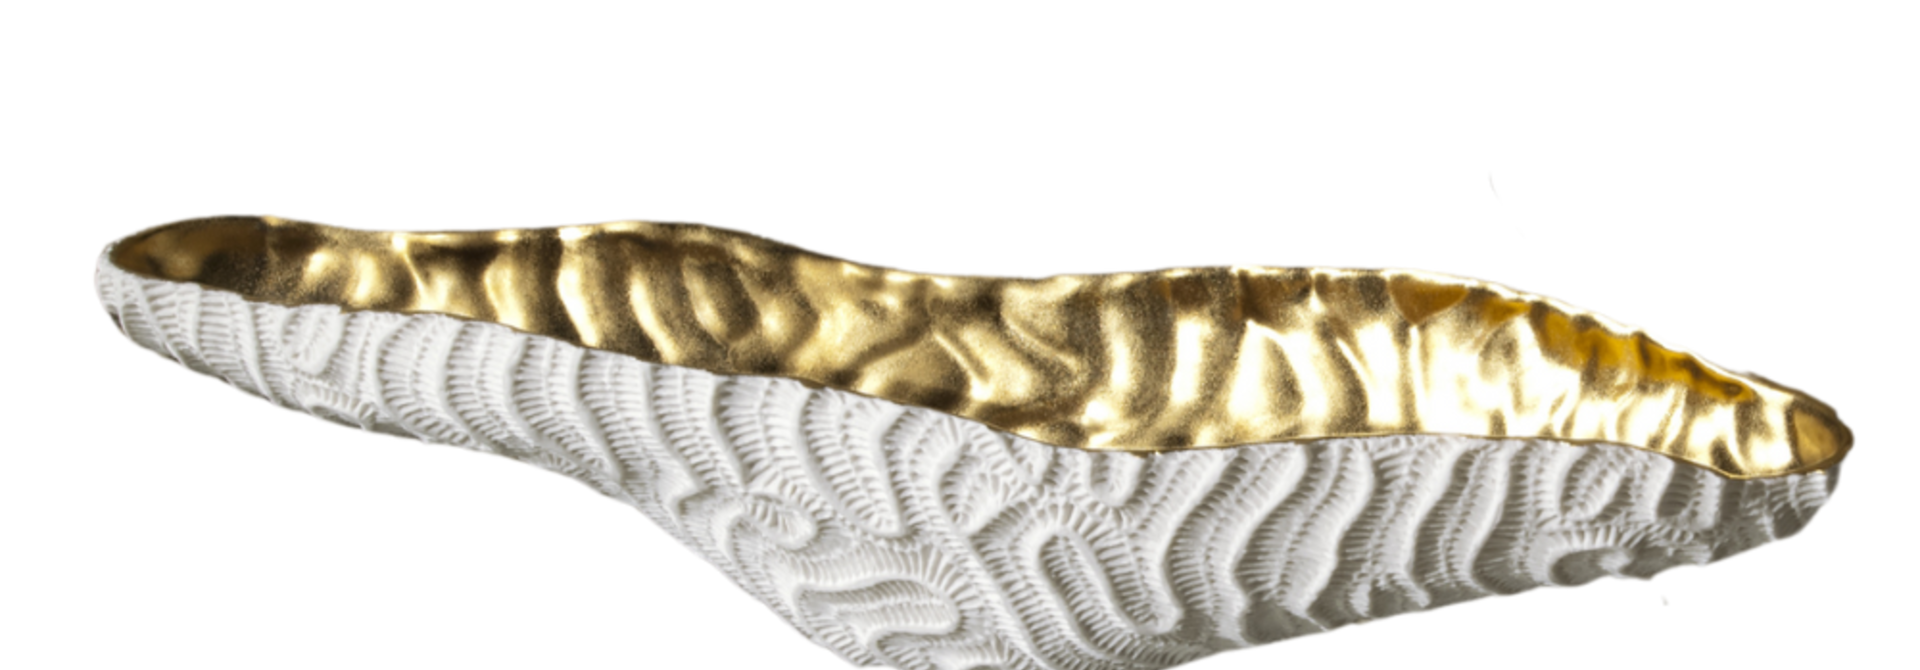 Centerpiece Bowl Coral Reef Fossilia Gold